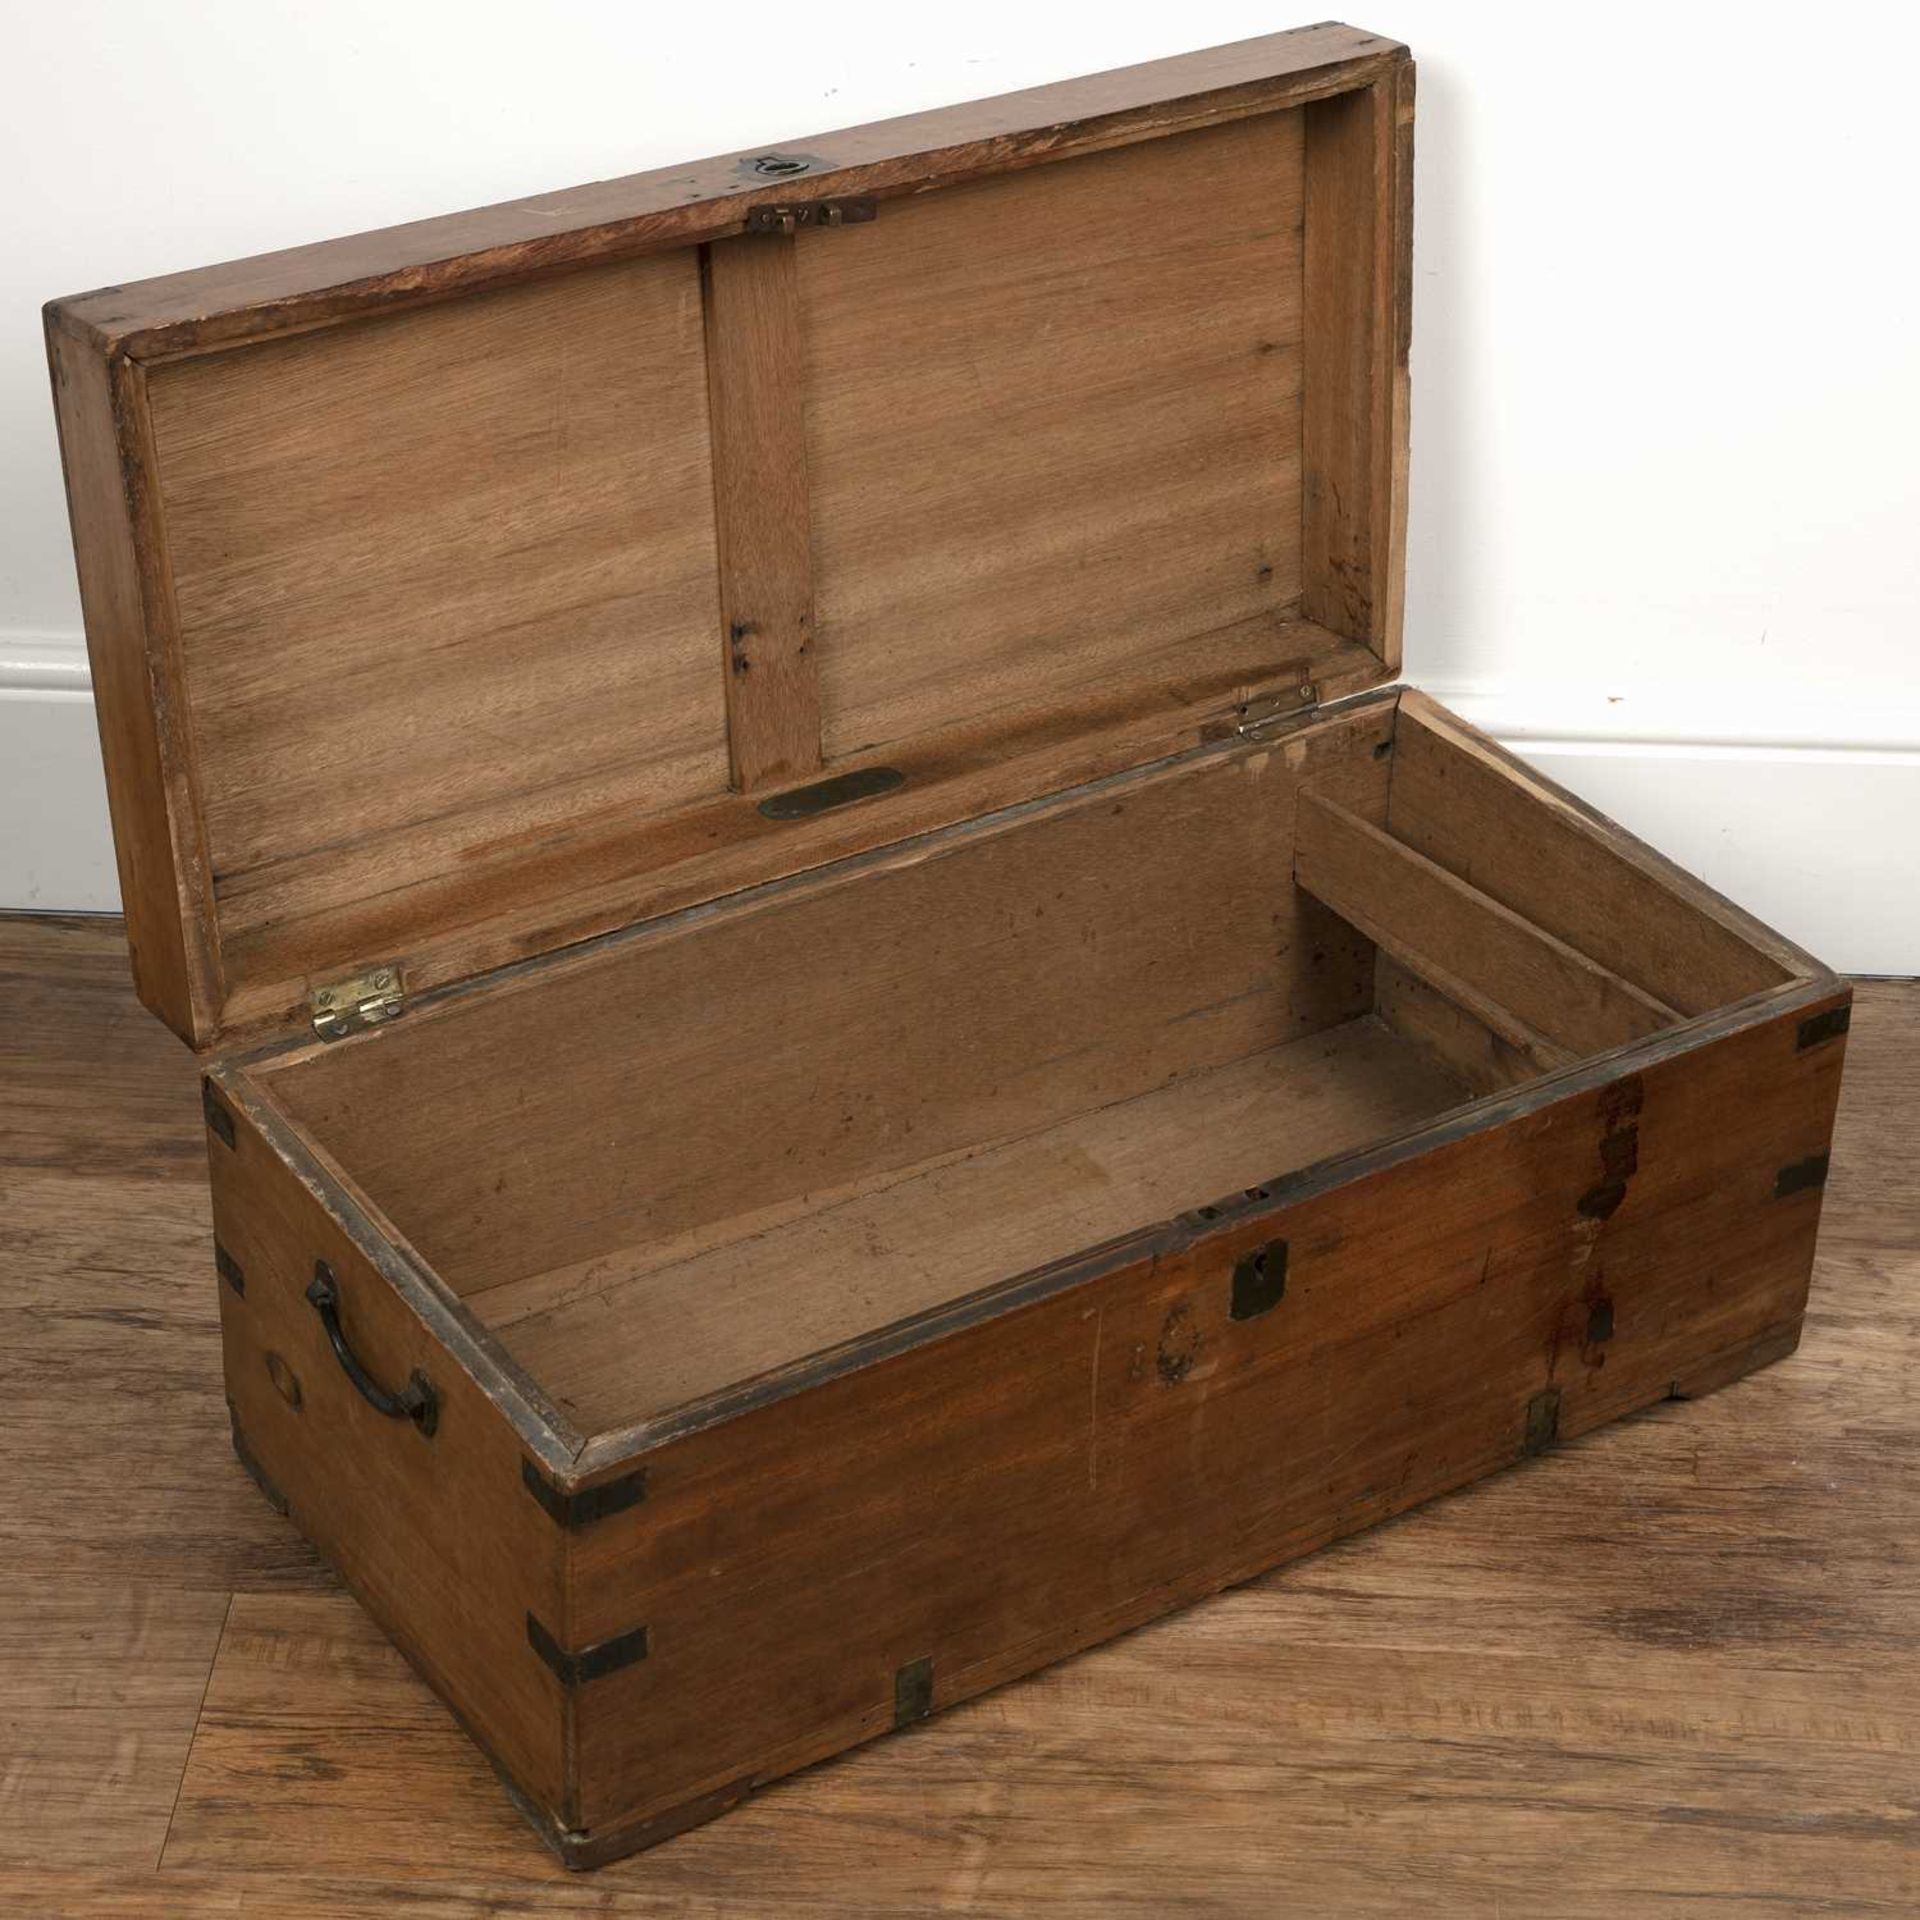 Small campaign teak trunk 19th Century, with brass handle and mounts, 70cm wide, 34cm deep, 29.5cm - Image 5 of 6